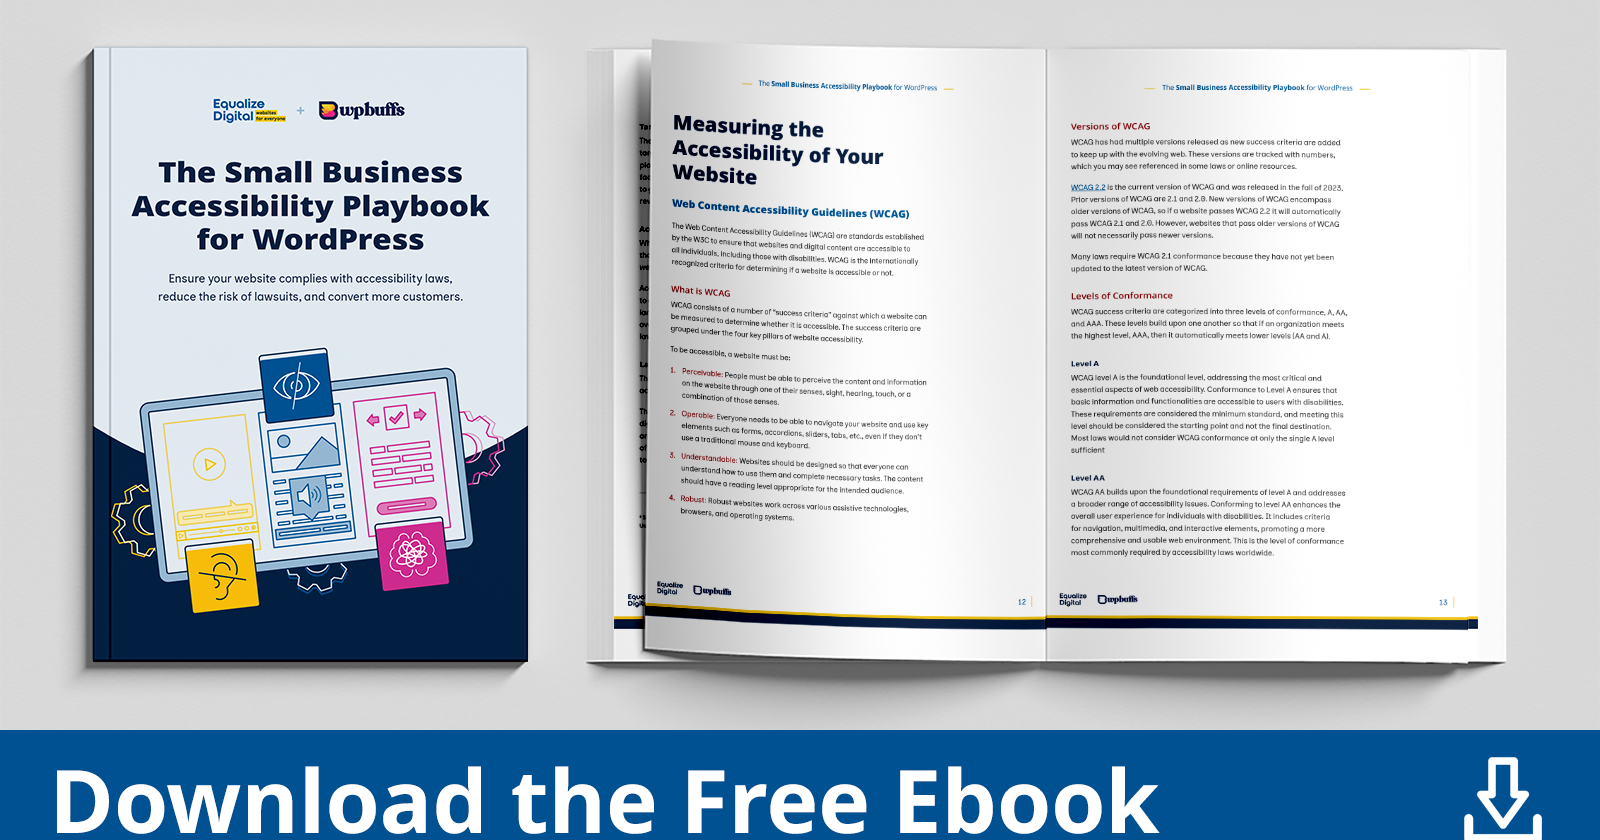 Download the free ebook: The Small Business Accessibility Playbook for WordPress